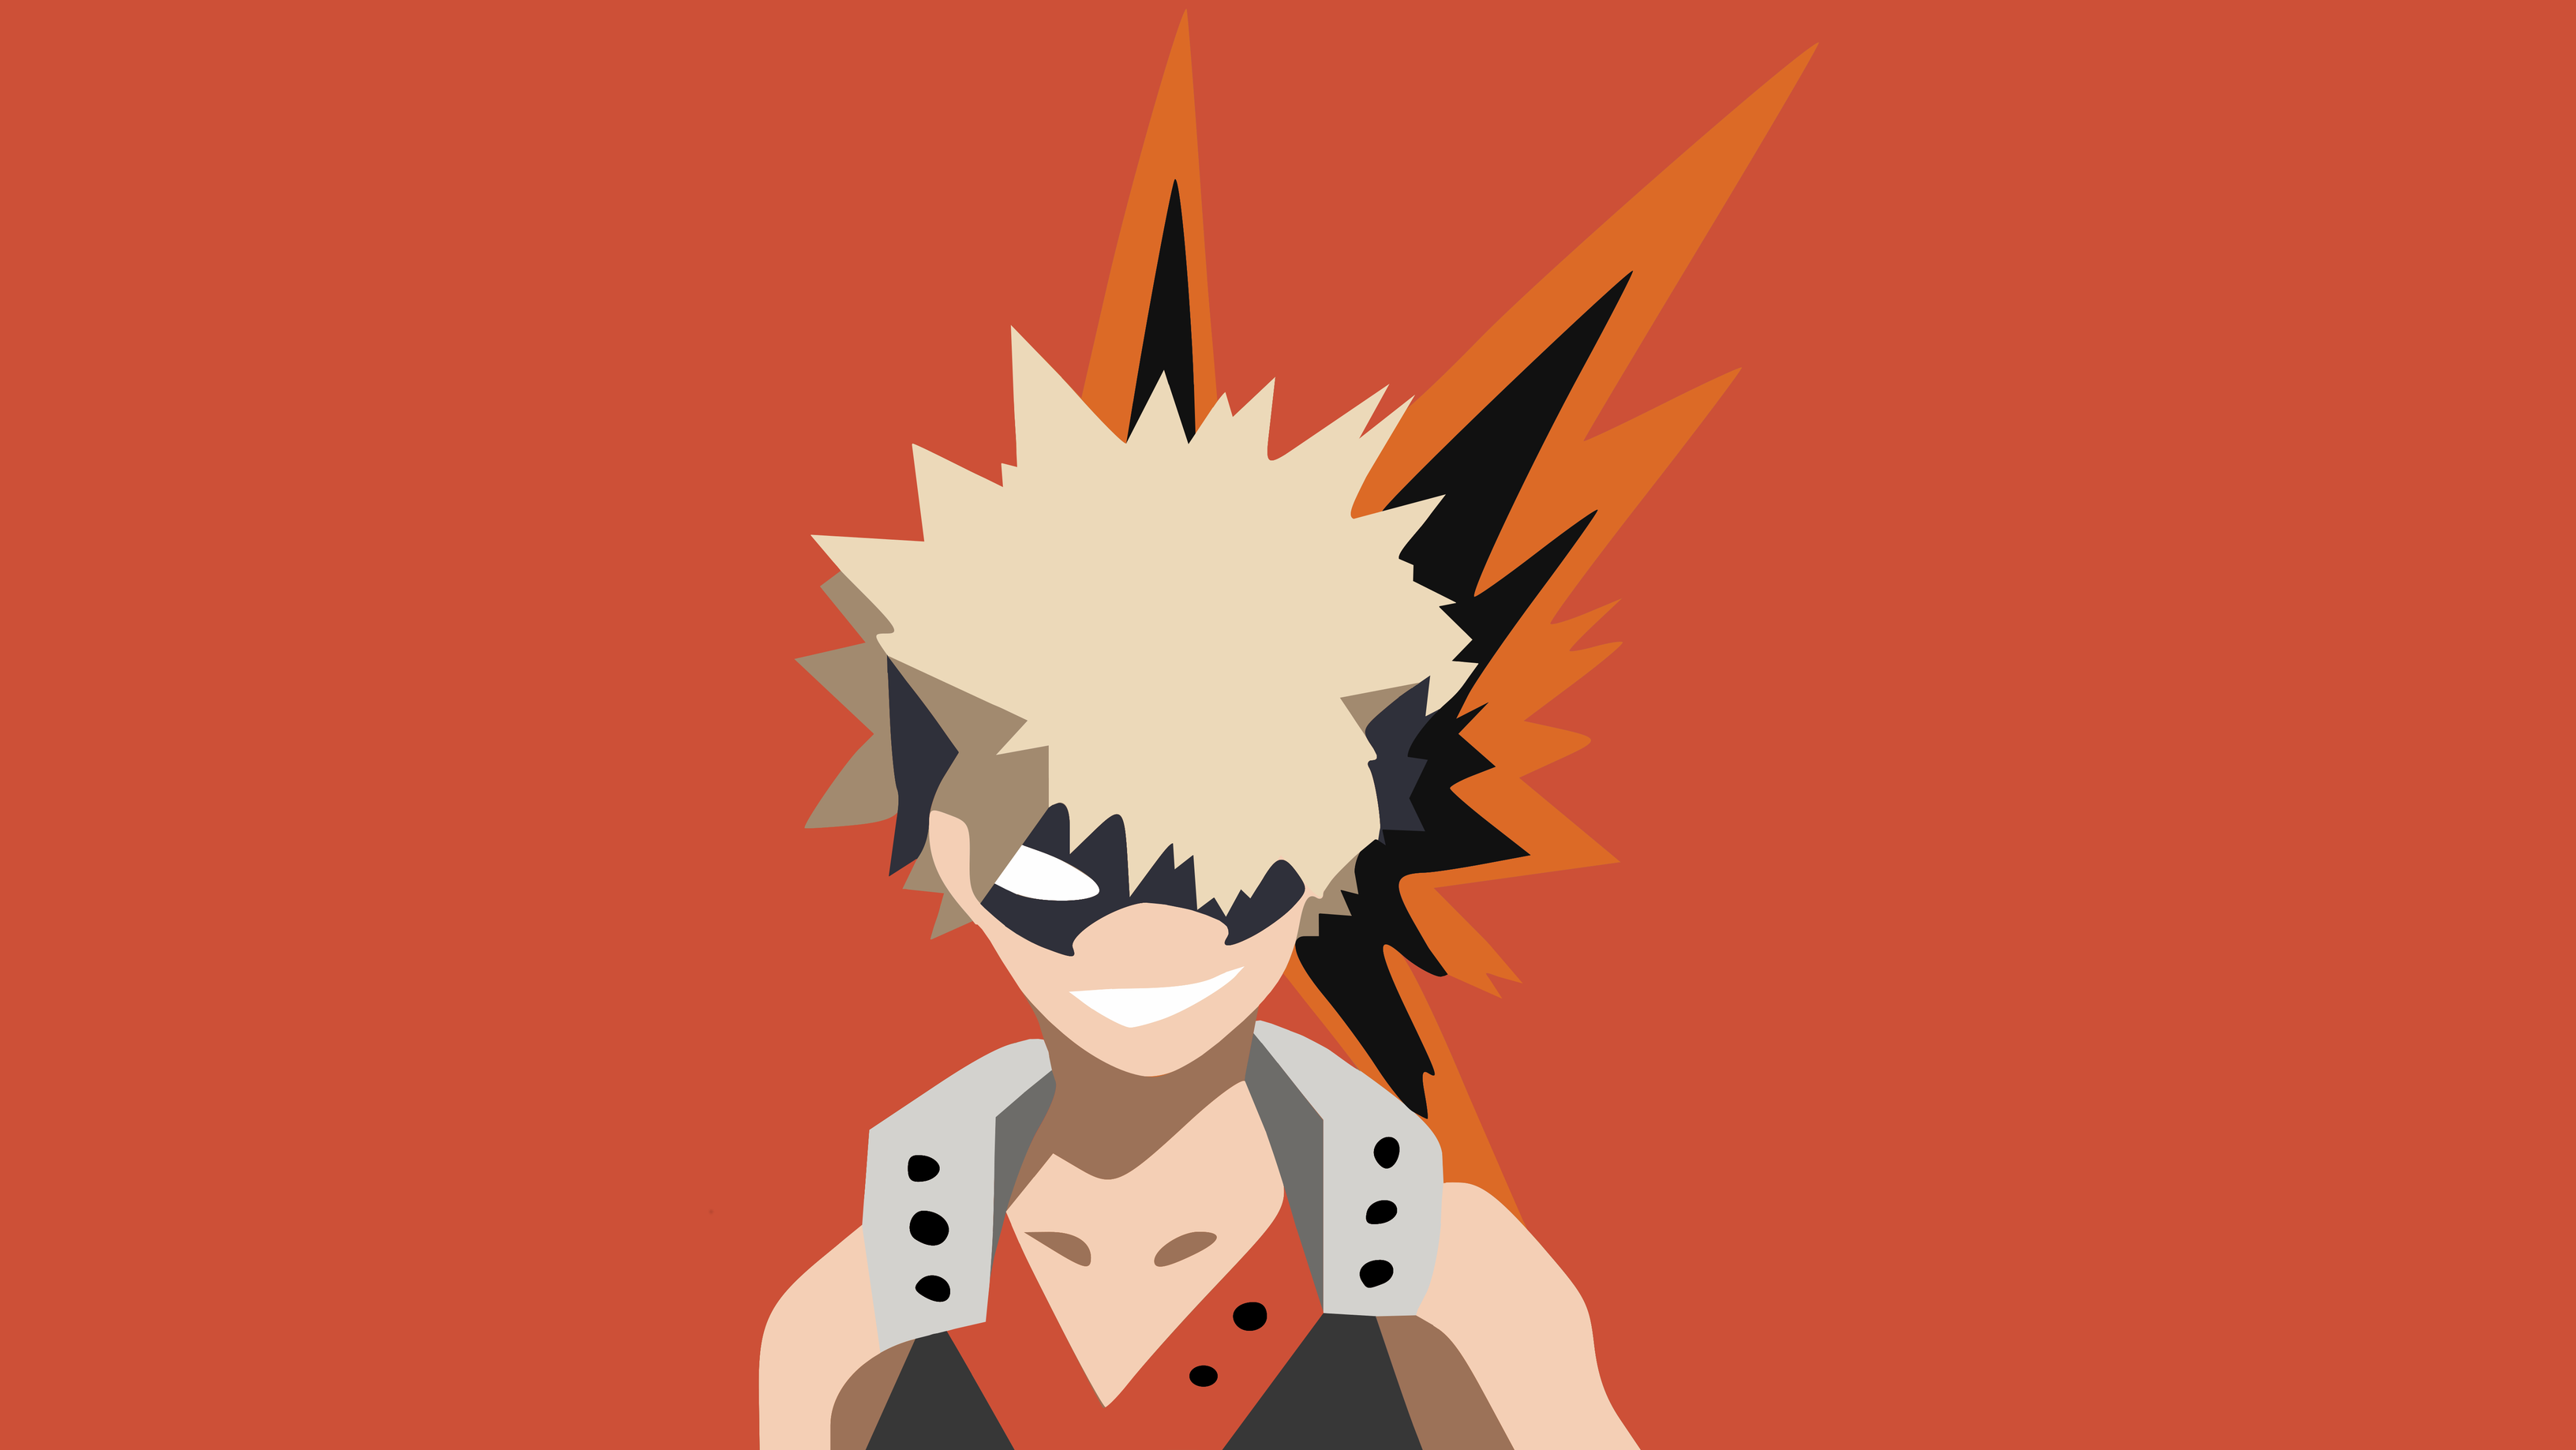 Here is come nice wallpapers of bakugou katsuki that no one asked for. 